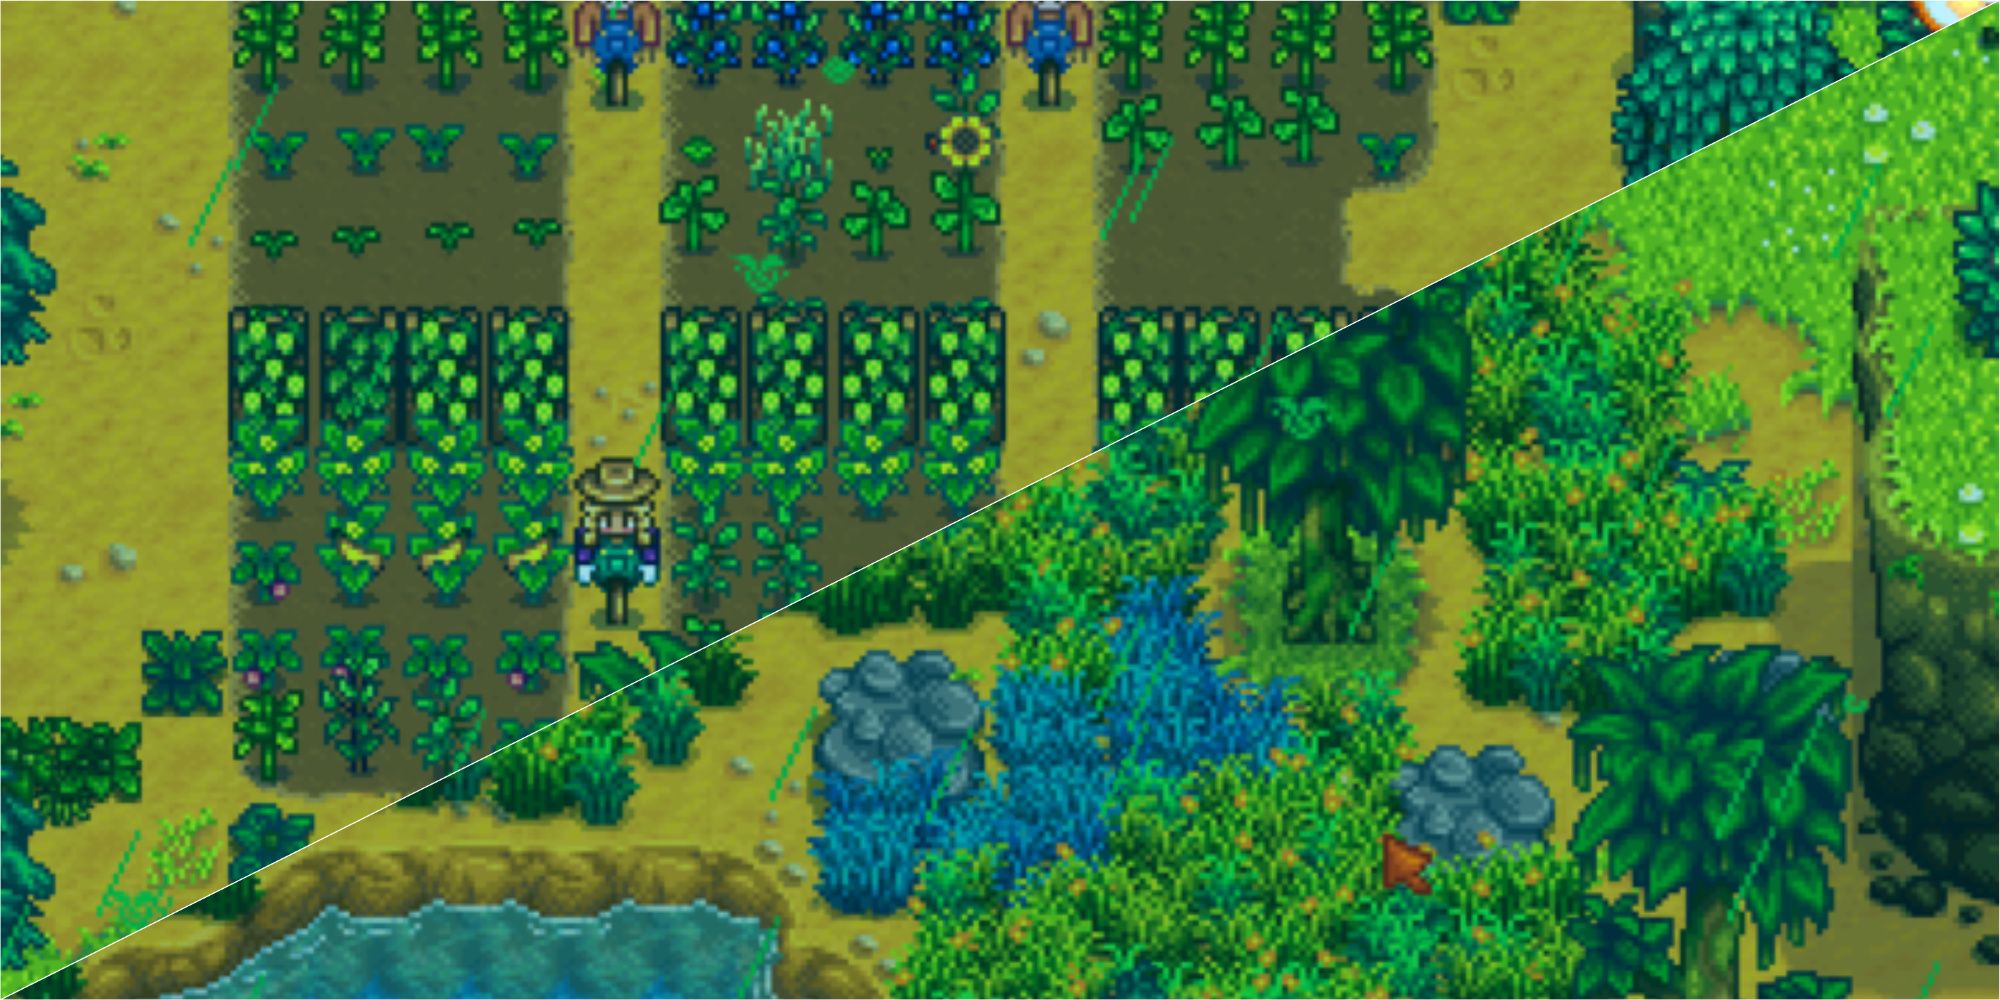 Collage showing the outside of the player's farm during the green rain event in Stardew Valley